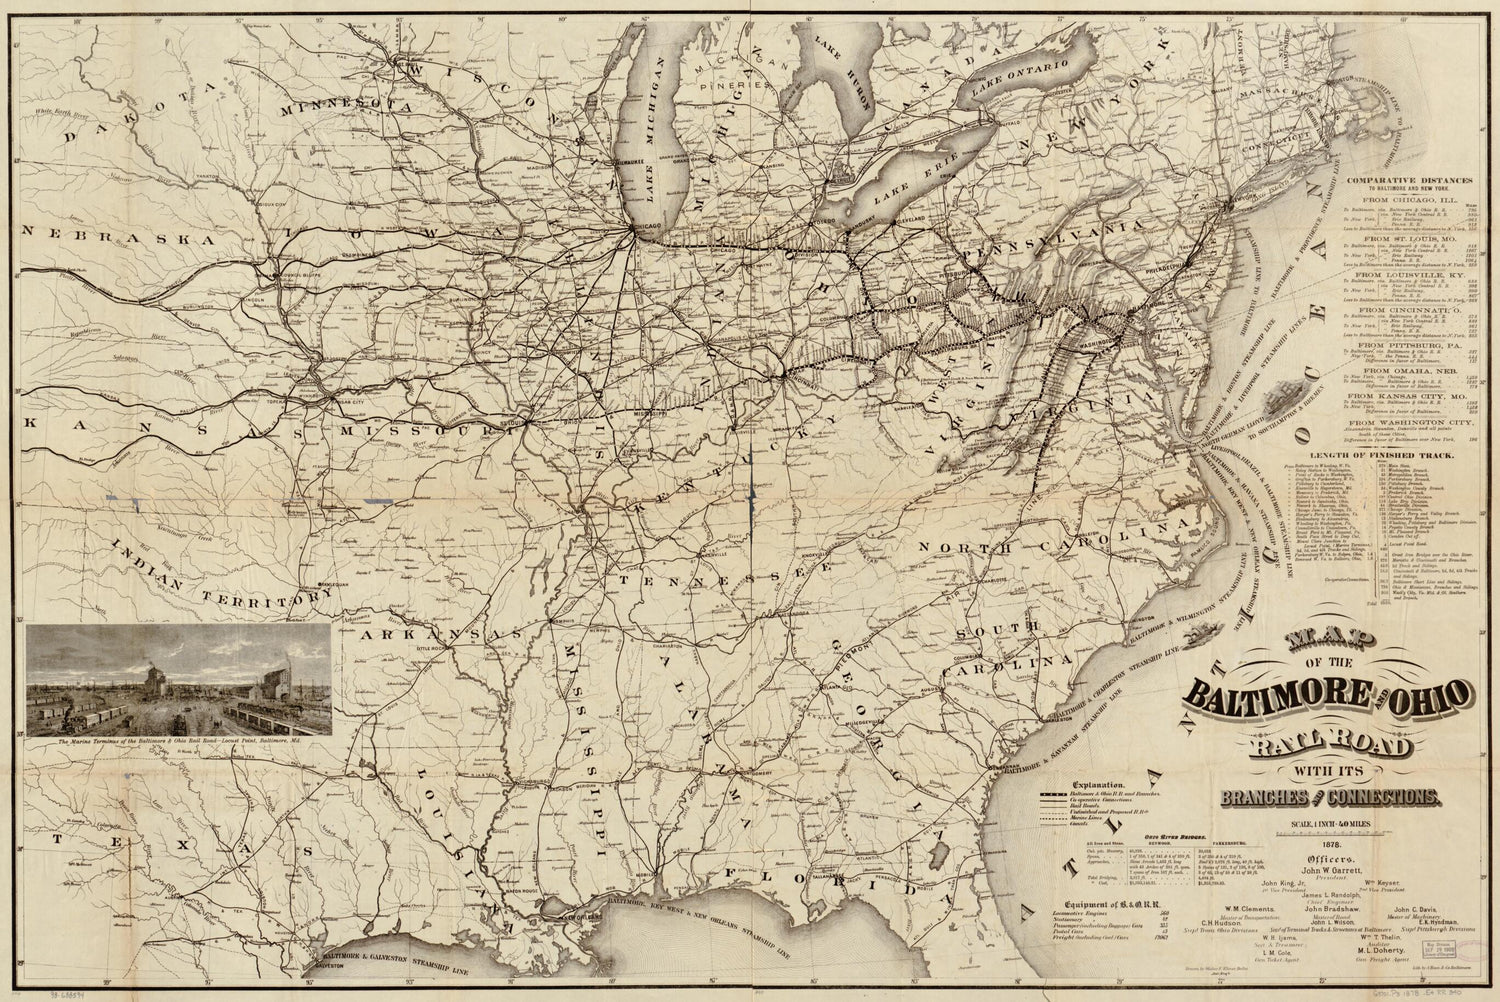 This old map of Map of the Baltimore and Ohio Rail Road With Its Branches and Connections from 1878 was created by  Baltimore and Ohio Railroad Company, Walter F. Elmer in 1878